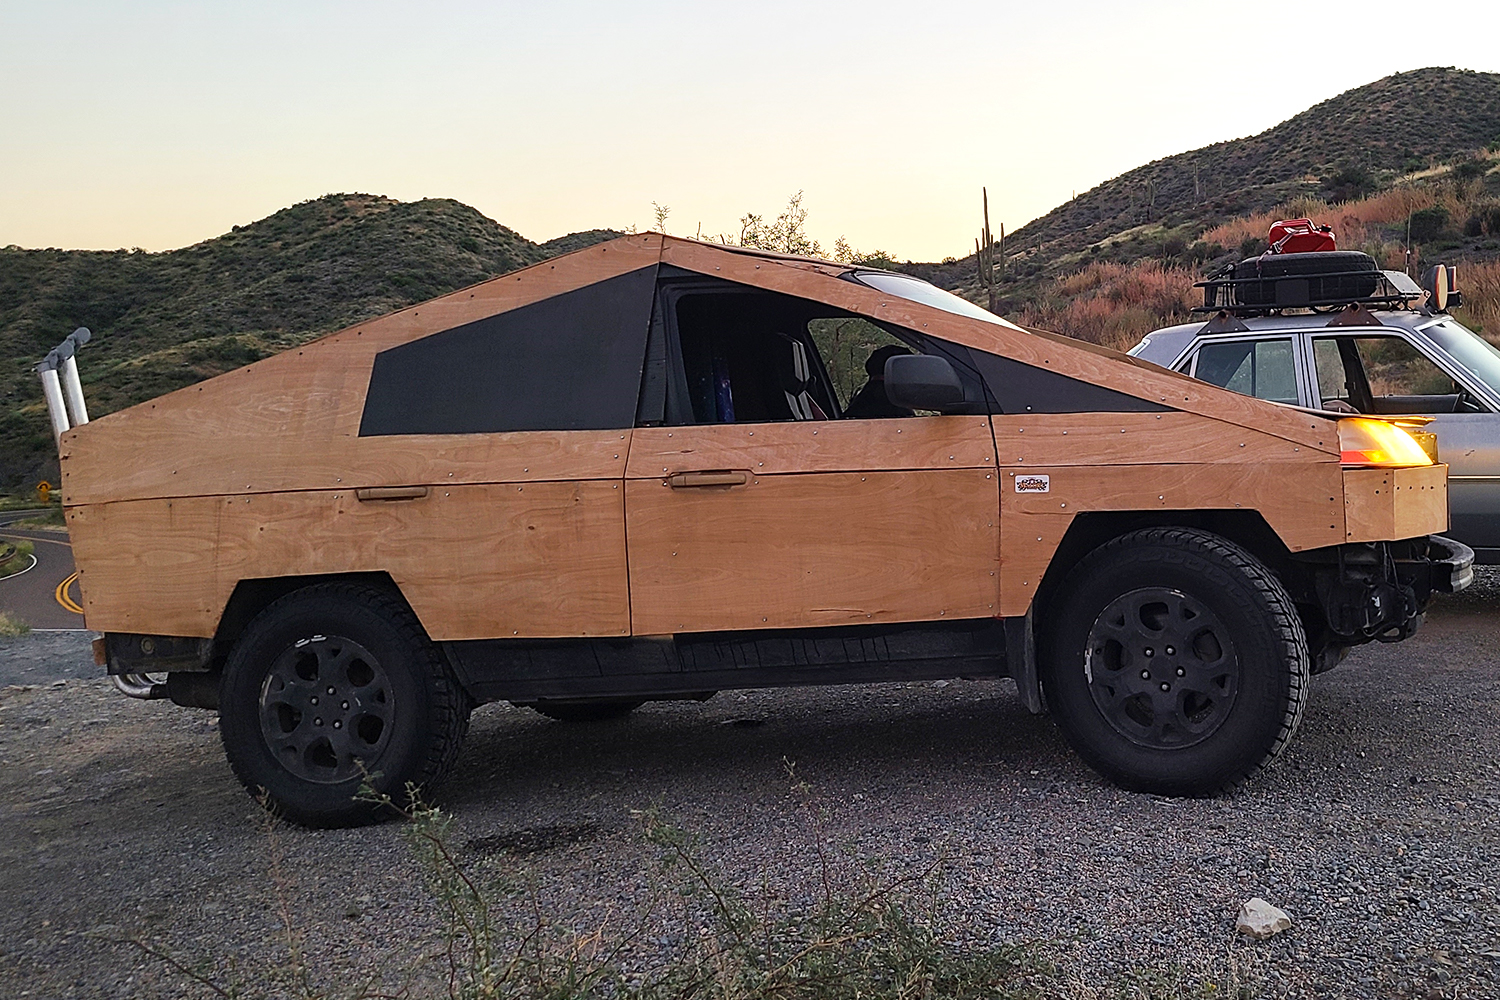 The Plybertruck, a homemade Cybertruck based on an Acura MDX and covered in plywood. We spoke to the owner Rachel Berge who drives it around Joseph City in Arizona.